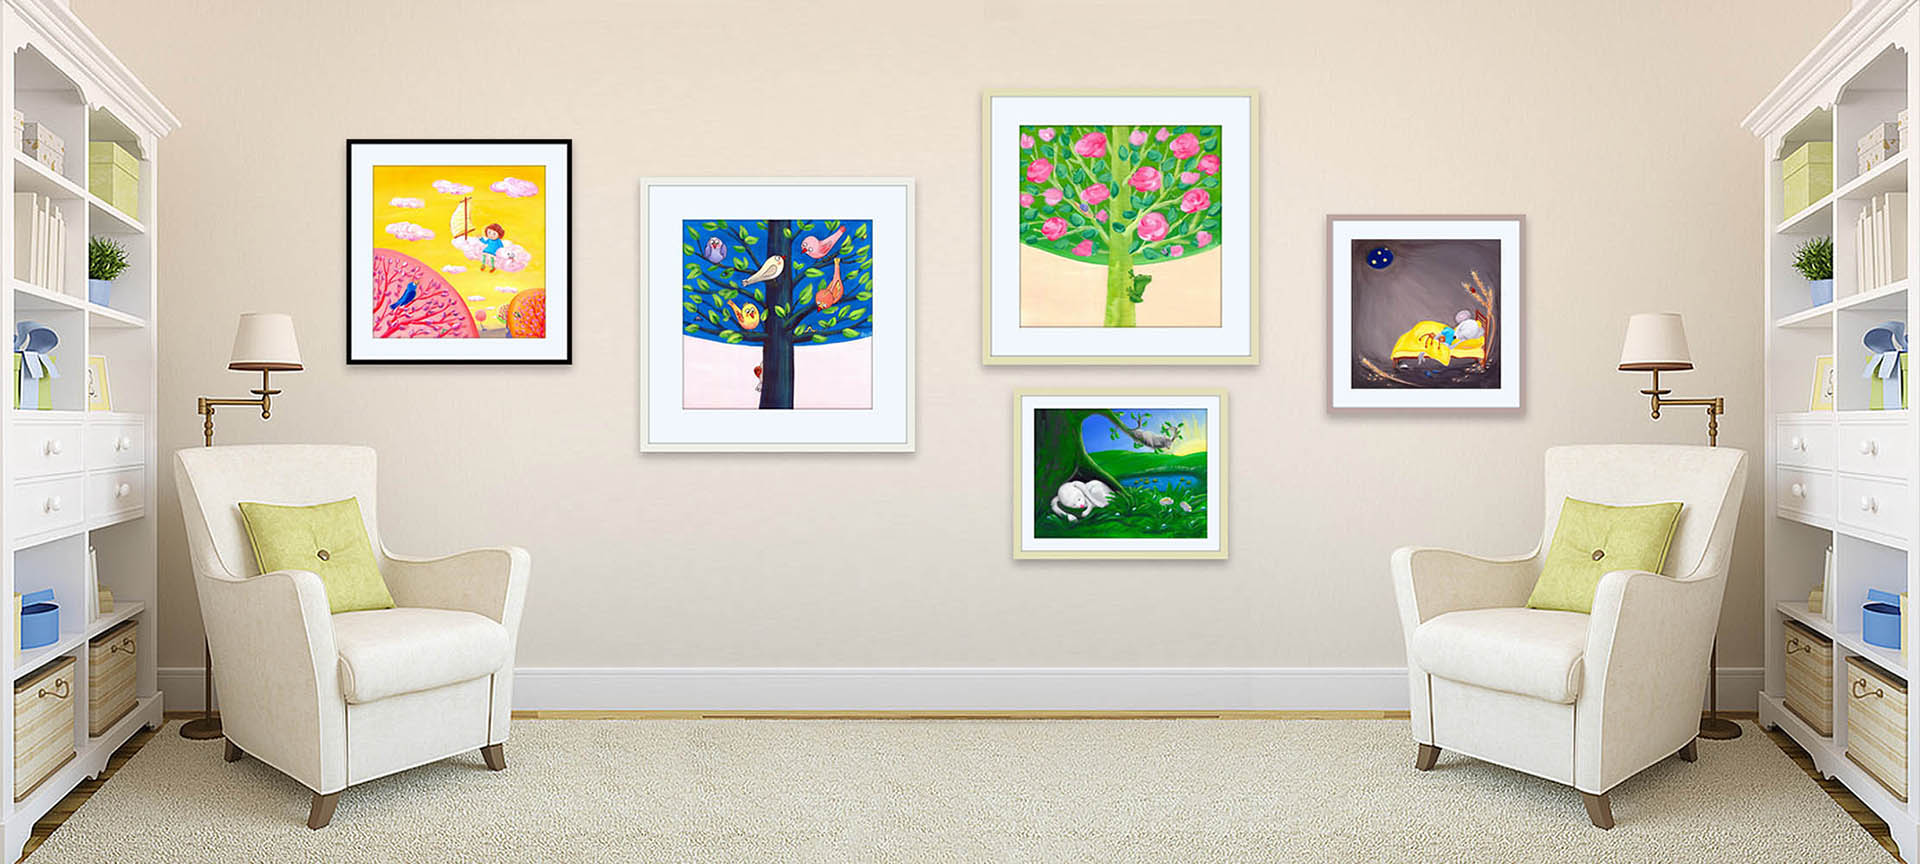 Colorful kids wall art pictures in a light interior.